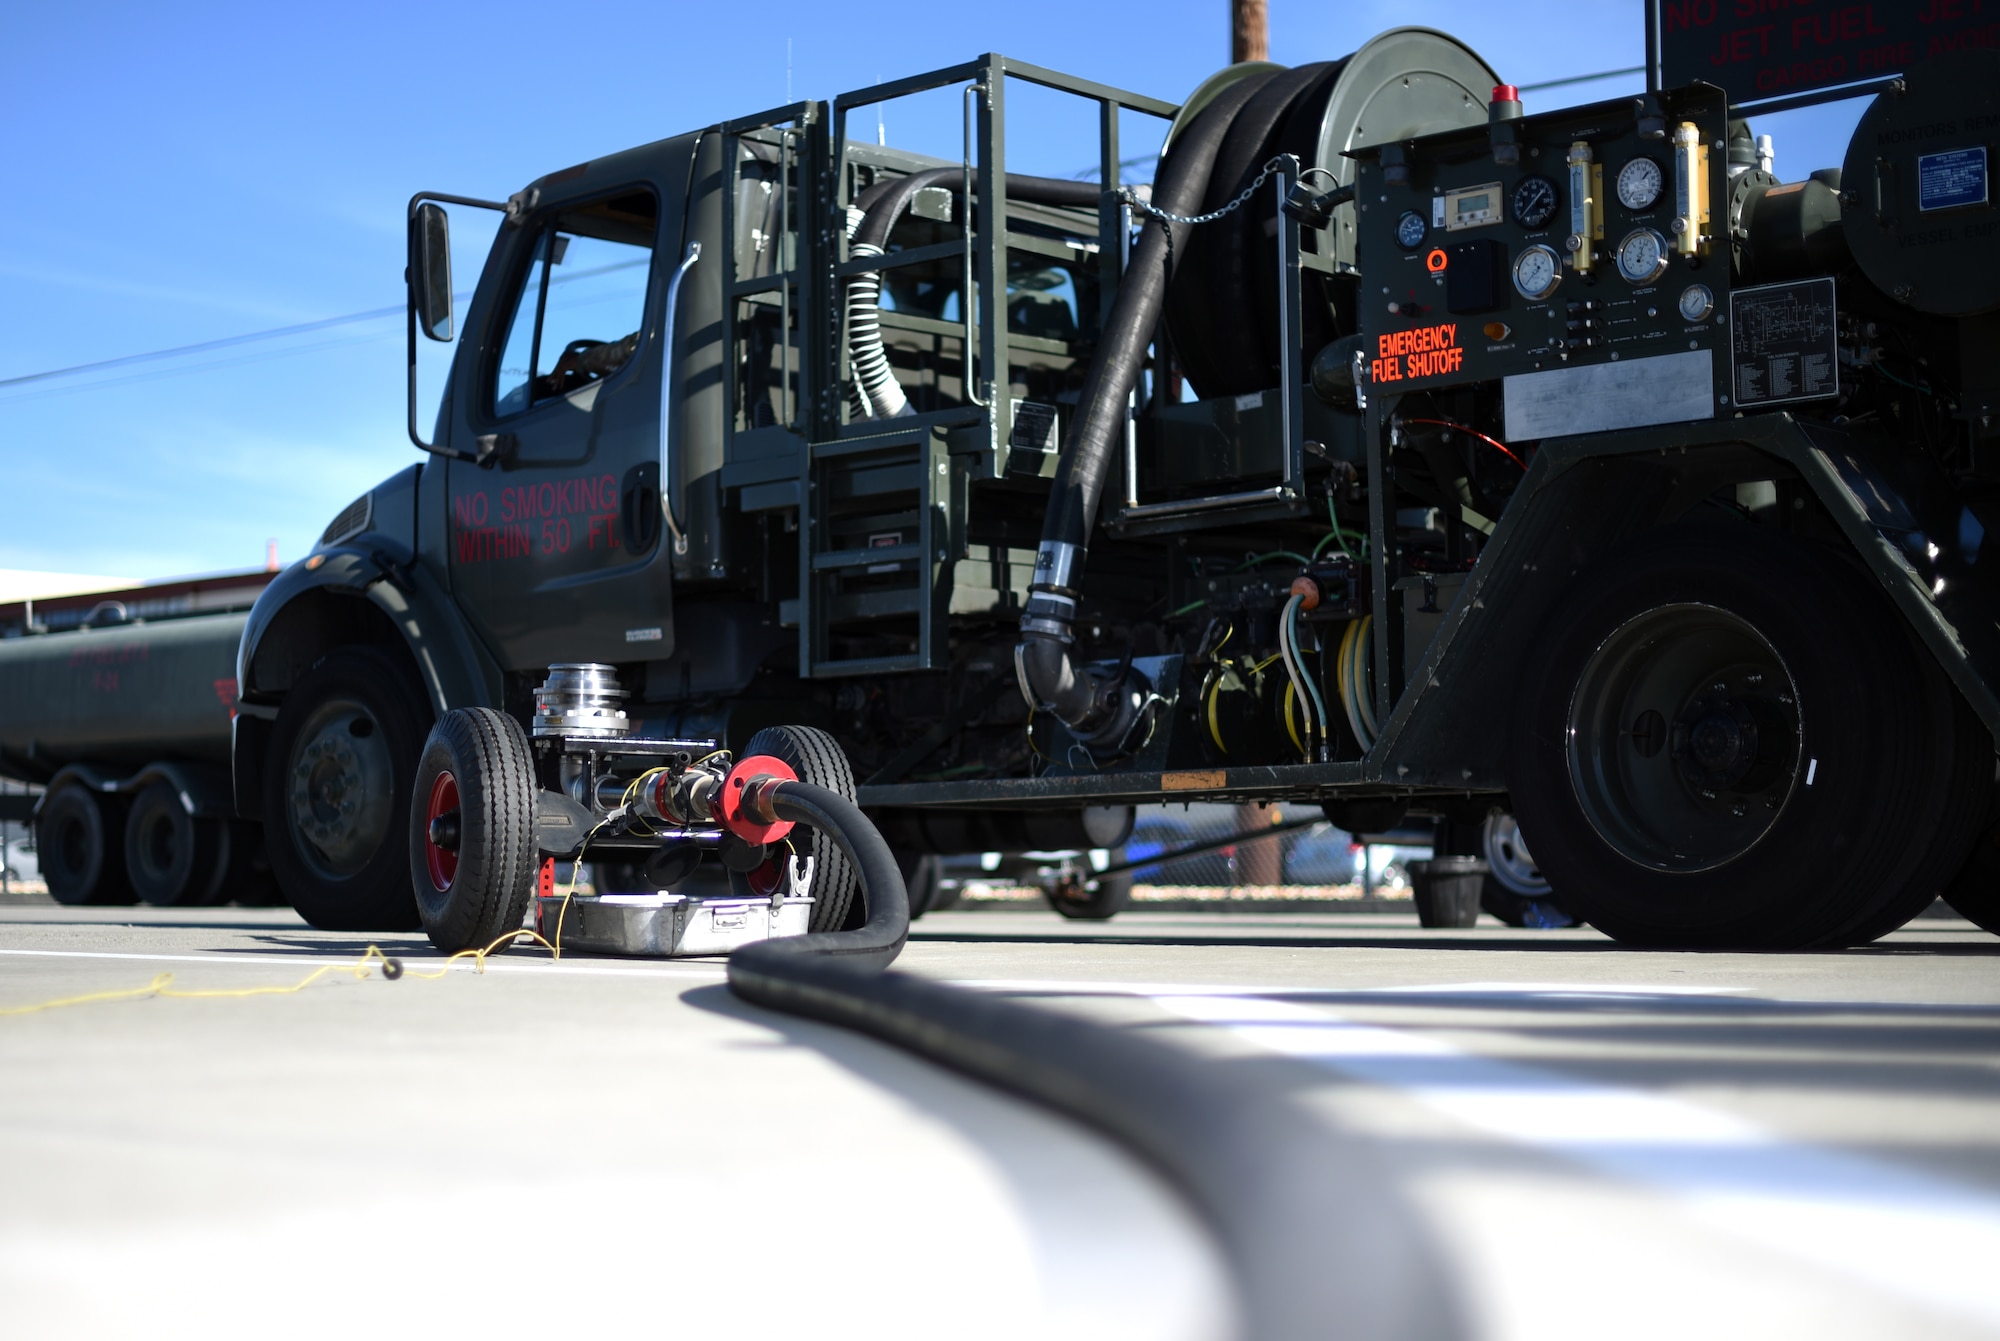 A prototype mobile fuel pressurizer sits ready for use beside a 60th Logistics Readiness Squadron fuel truck July 10, 2019, at Travis Air Force Base, California. The prototype has been proven to cut man hours for the fuel pressurization process from two hours to 45 minutes and is the brainchild of U.S. Air Force Senior Airman Tanner O’Laughlin, 60th LRS fuels distribution operator. (U.S. Air Force photo by Senior Airman Christian Conrad)